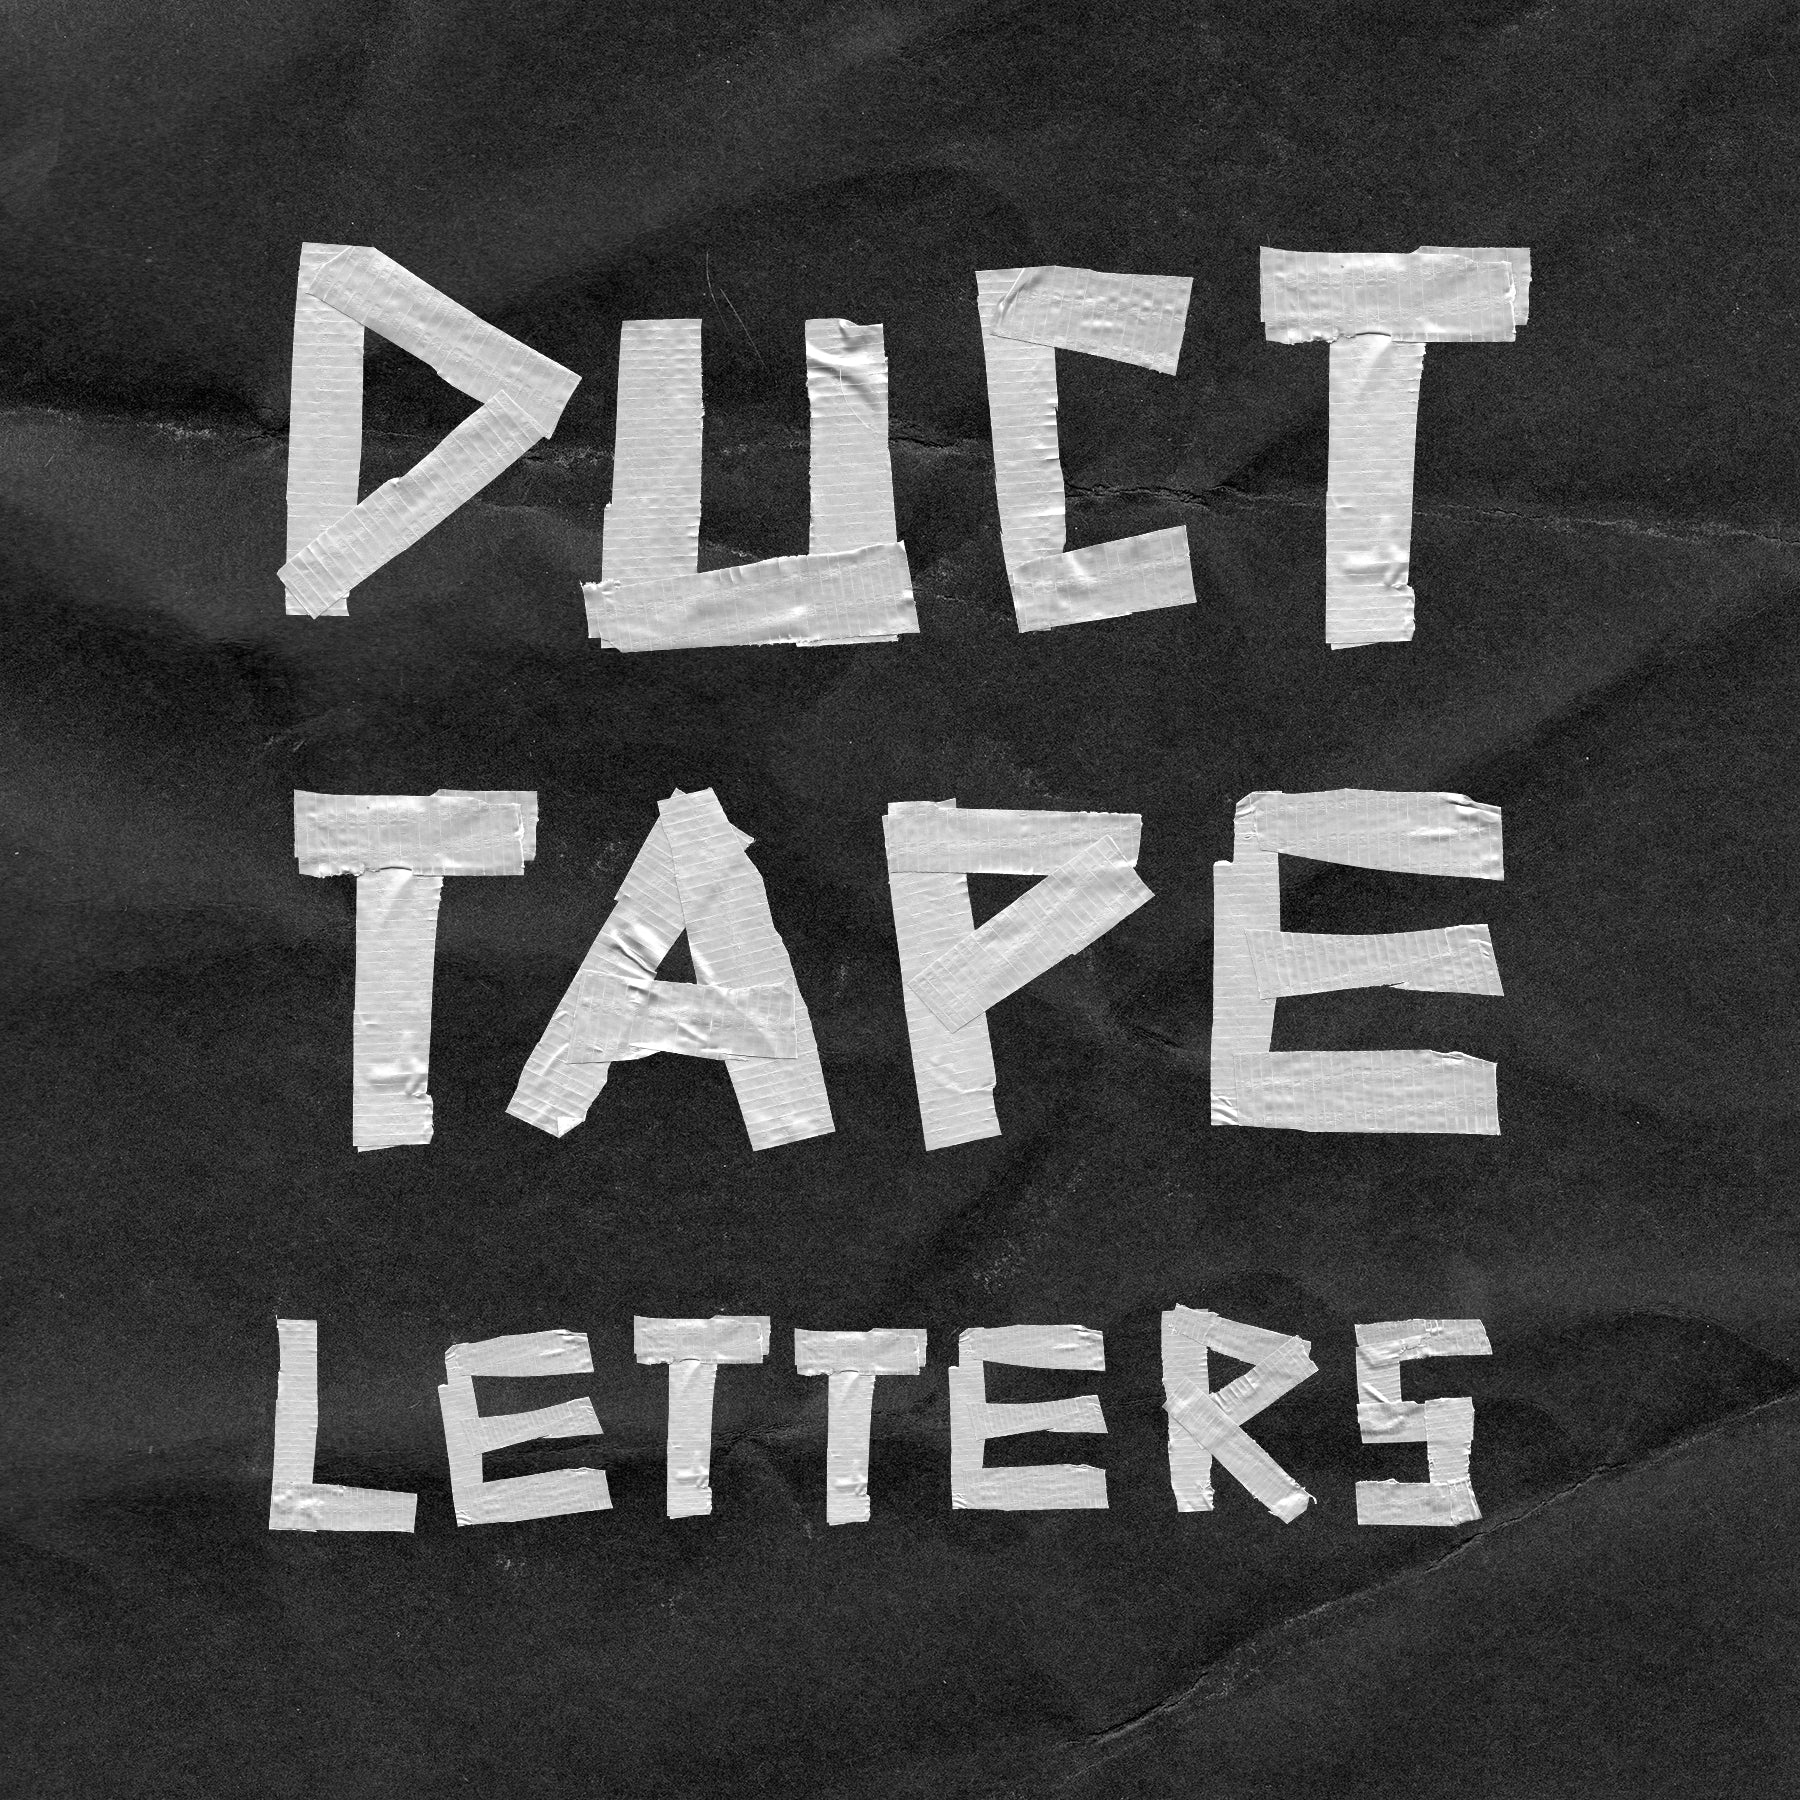 Text made out of duct tape on a textured background that reads "DUCT TAPE LETTERS".